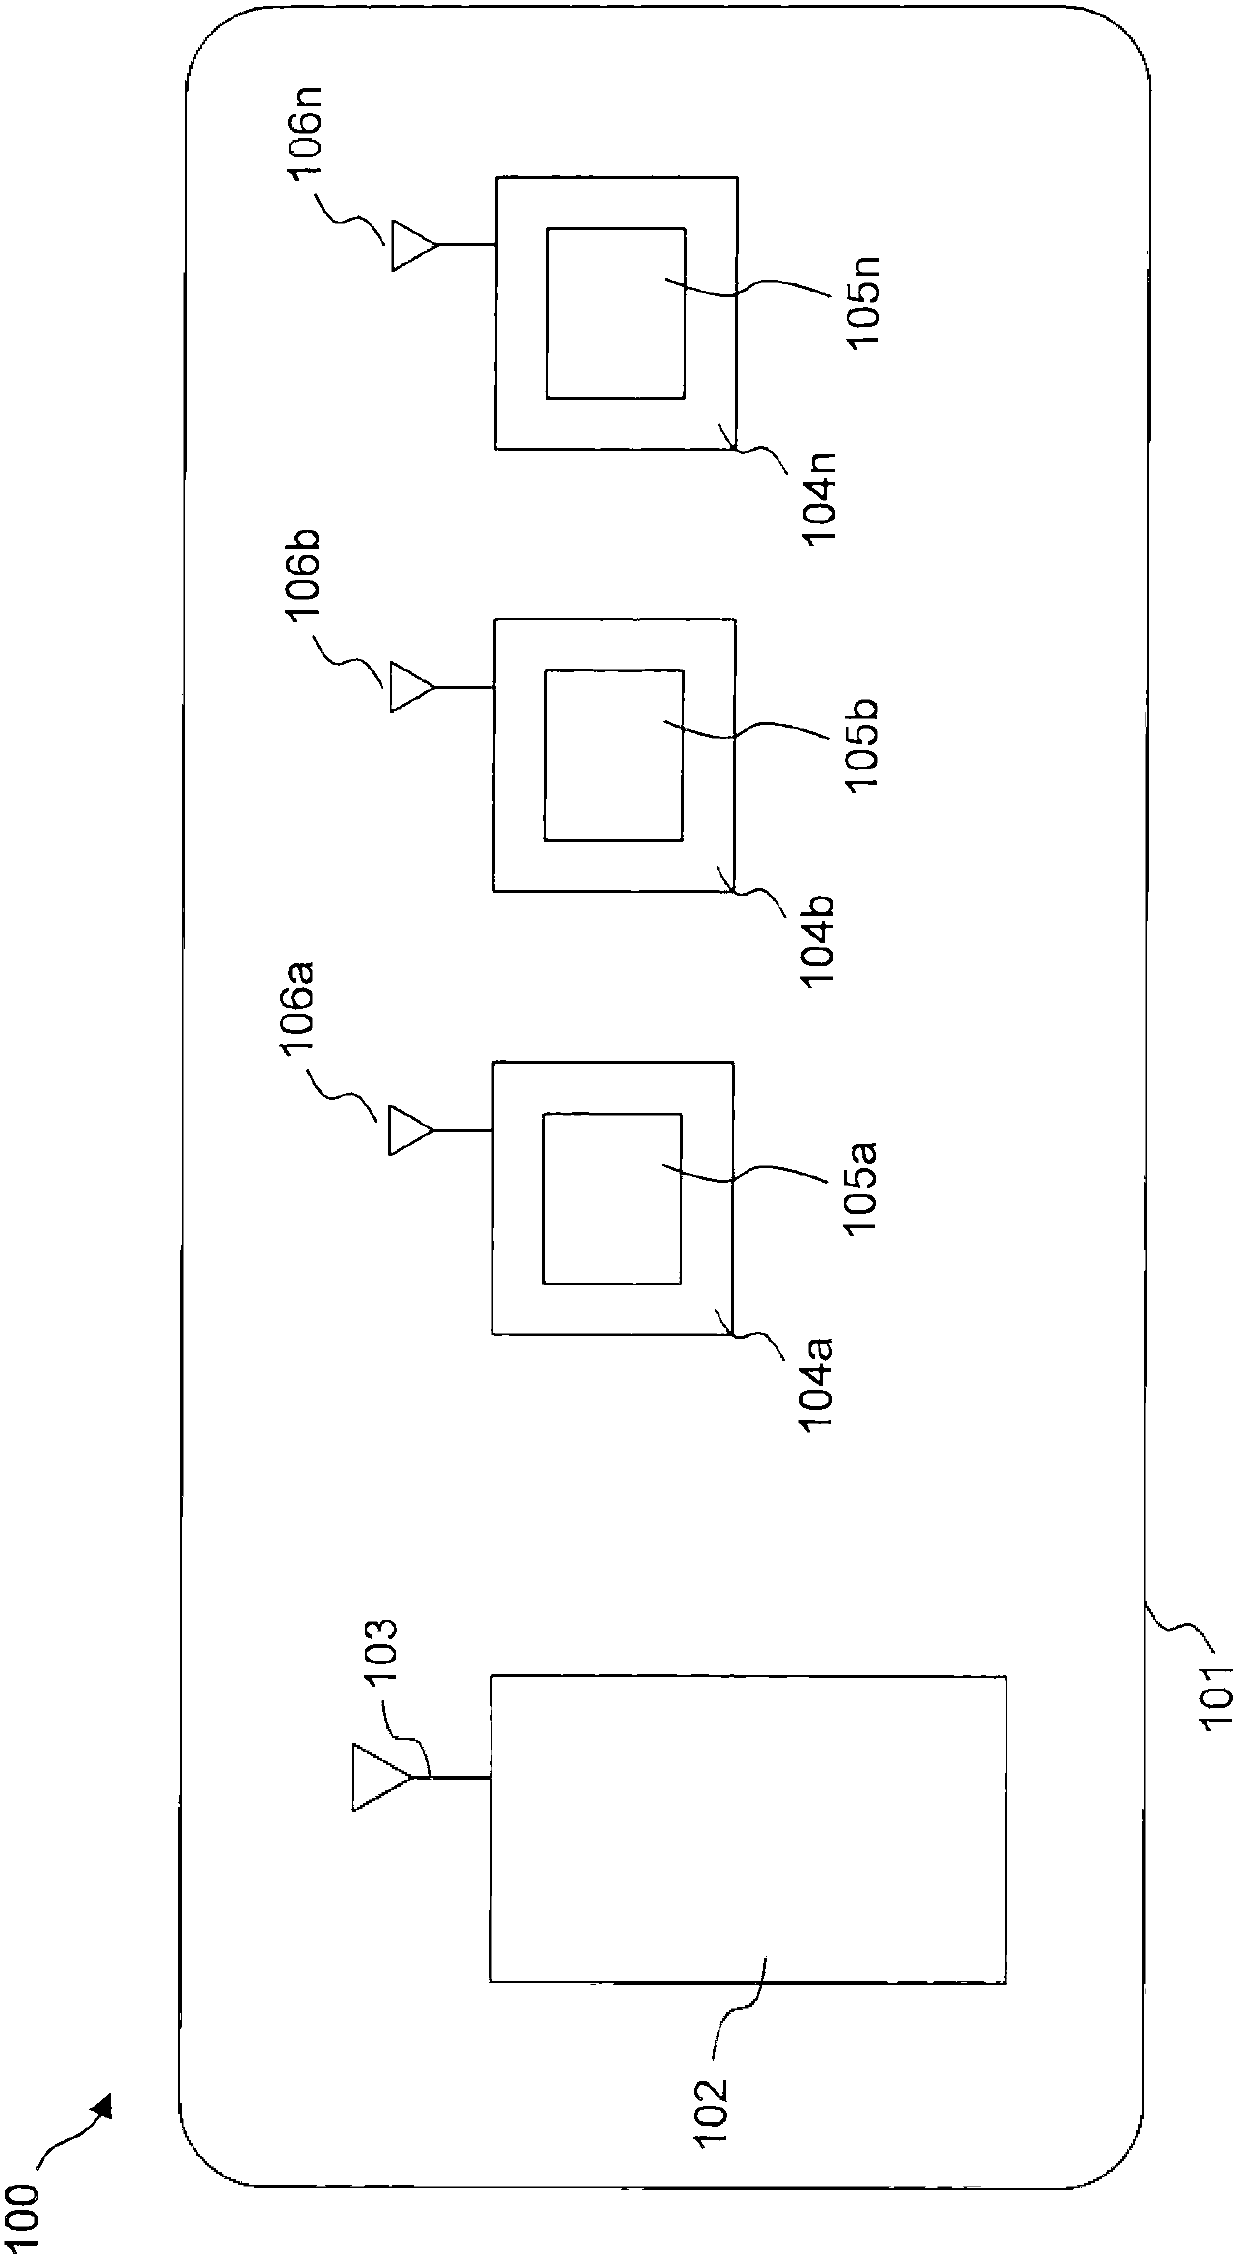 Power savings in a mobile communications device through dynamic control of processed bandwidth